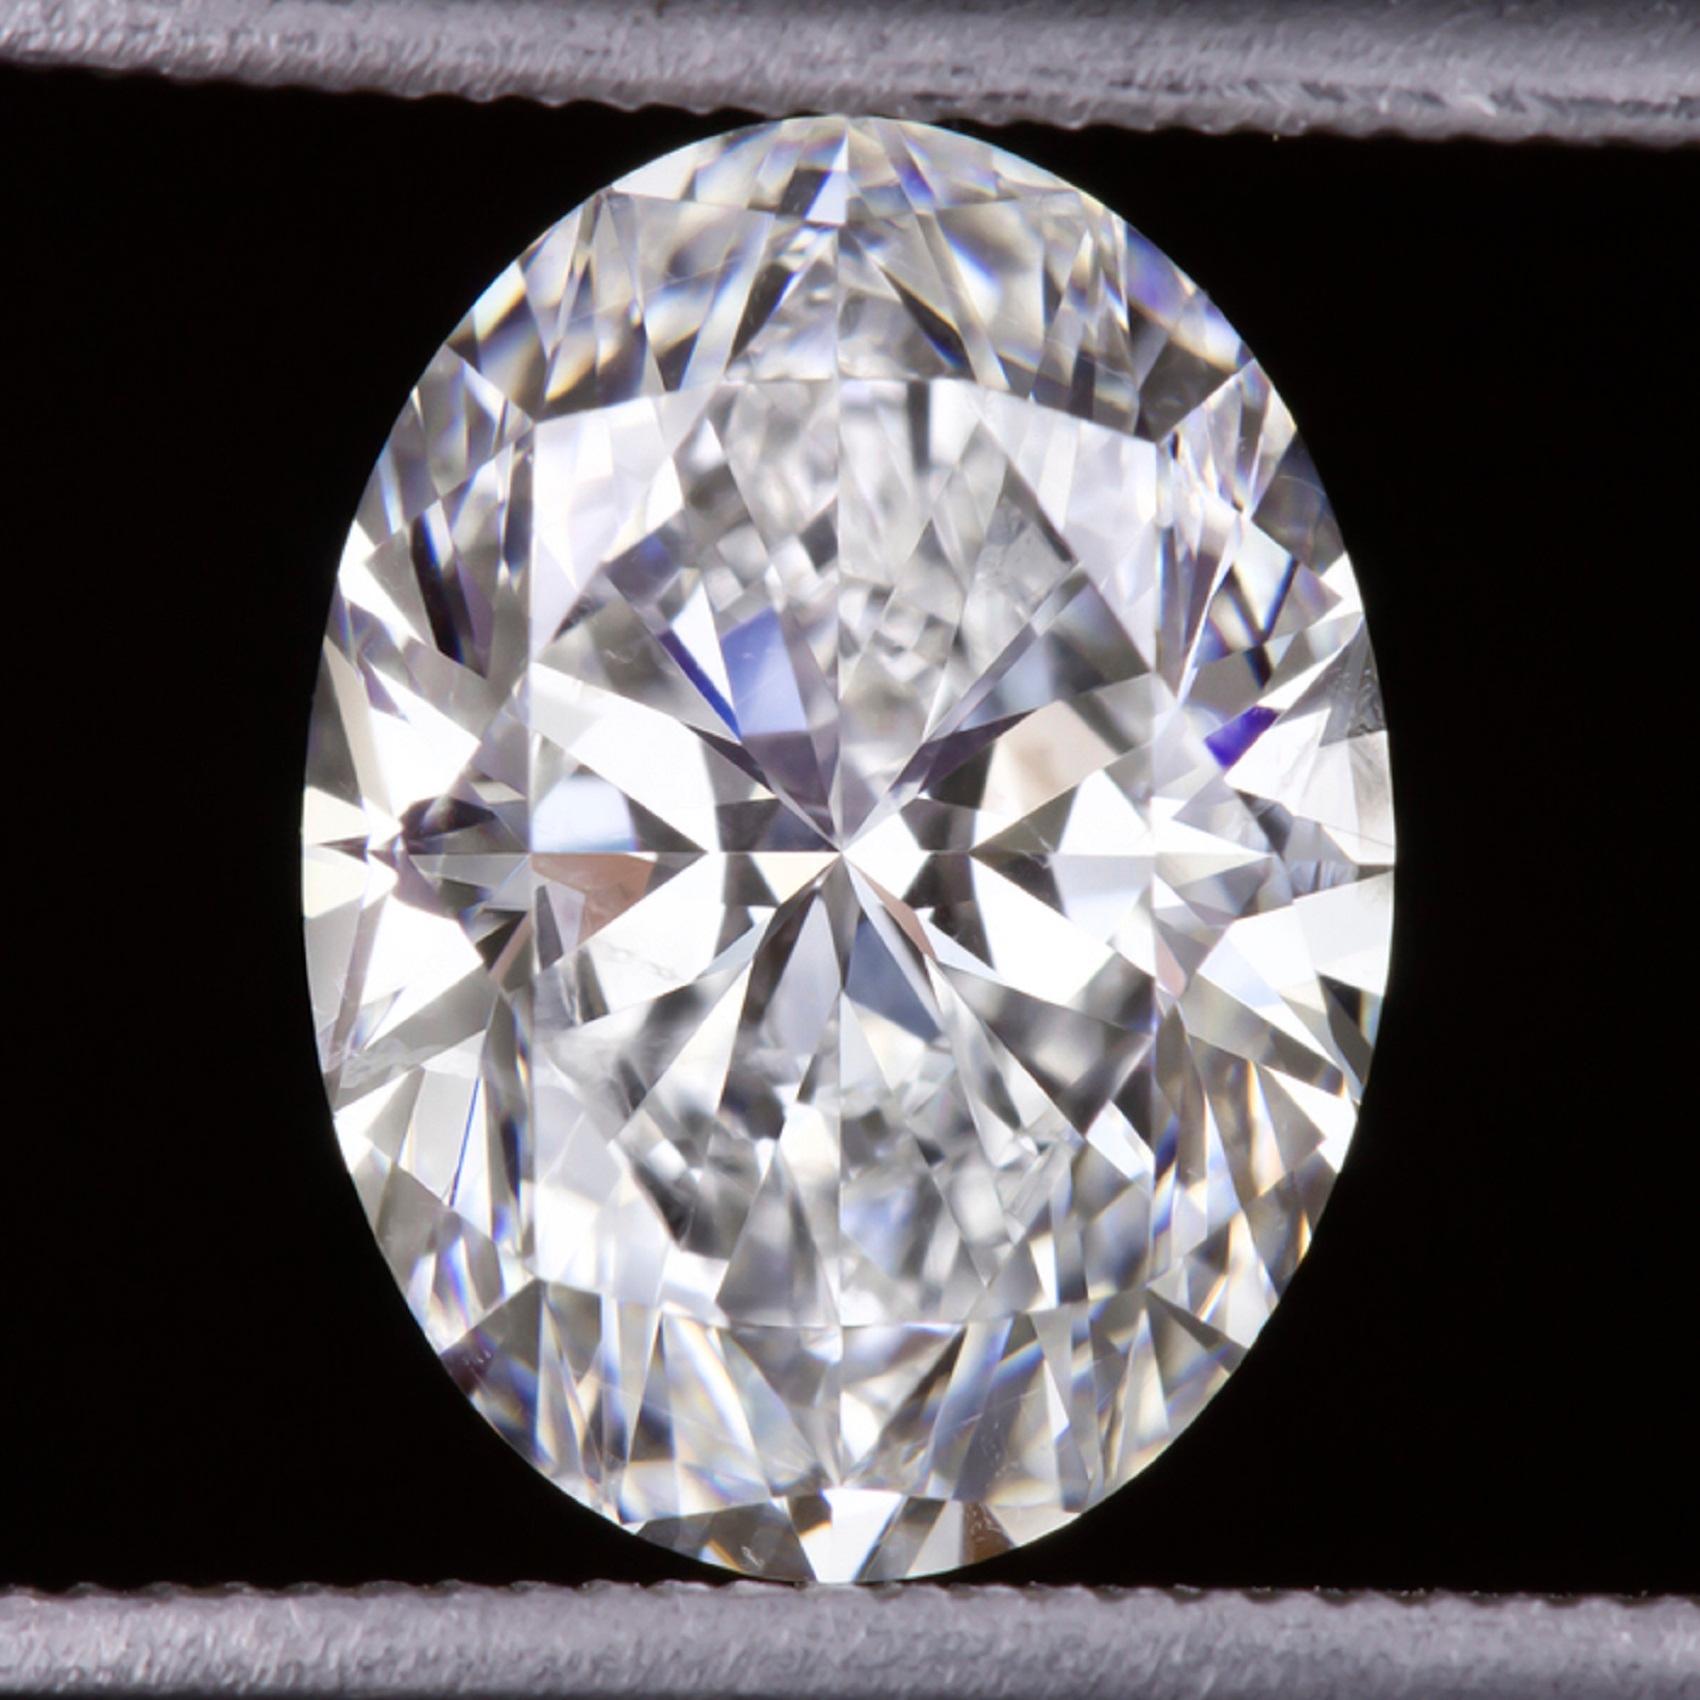 An amazing  5 catat GIA certified oval cut diamond has excellent H color, a completely eye clean appearance, and gorgeous, lively brilliance! Oval cuts are one of the most fashionable and sought after diamond cuts, and it is very flattering and eye